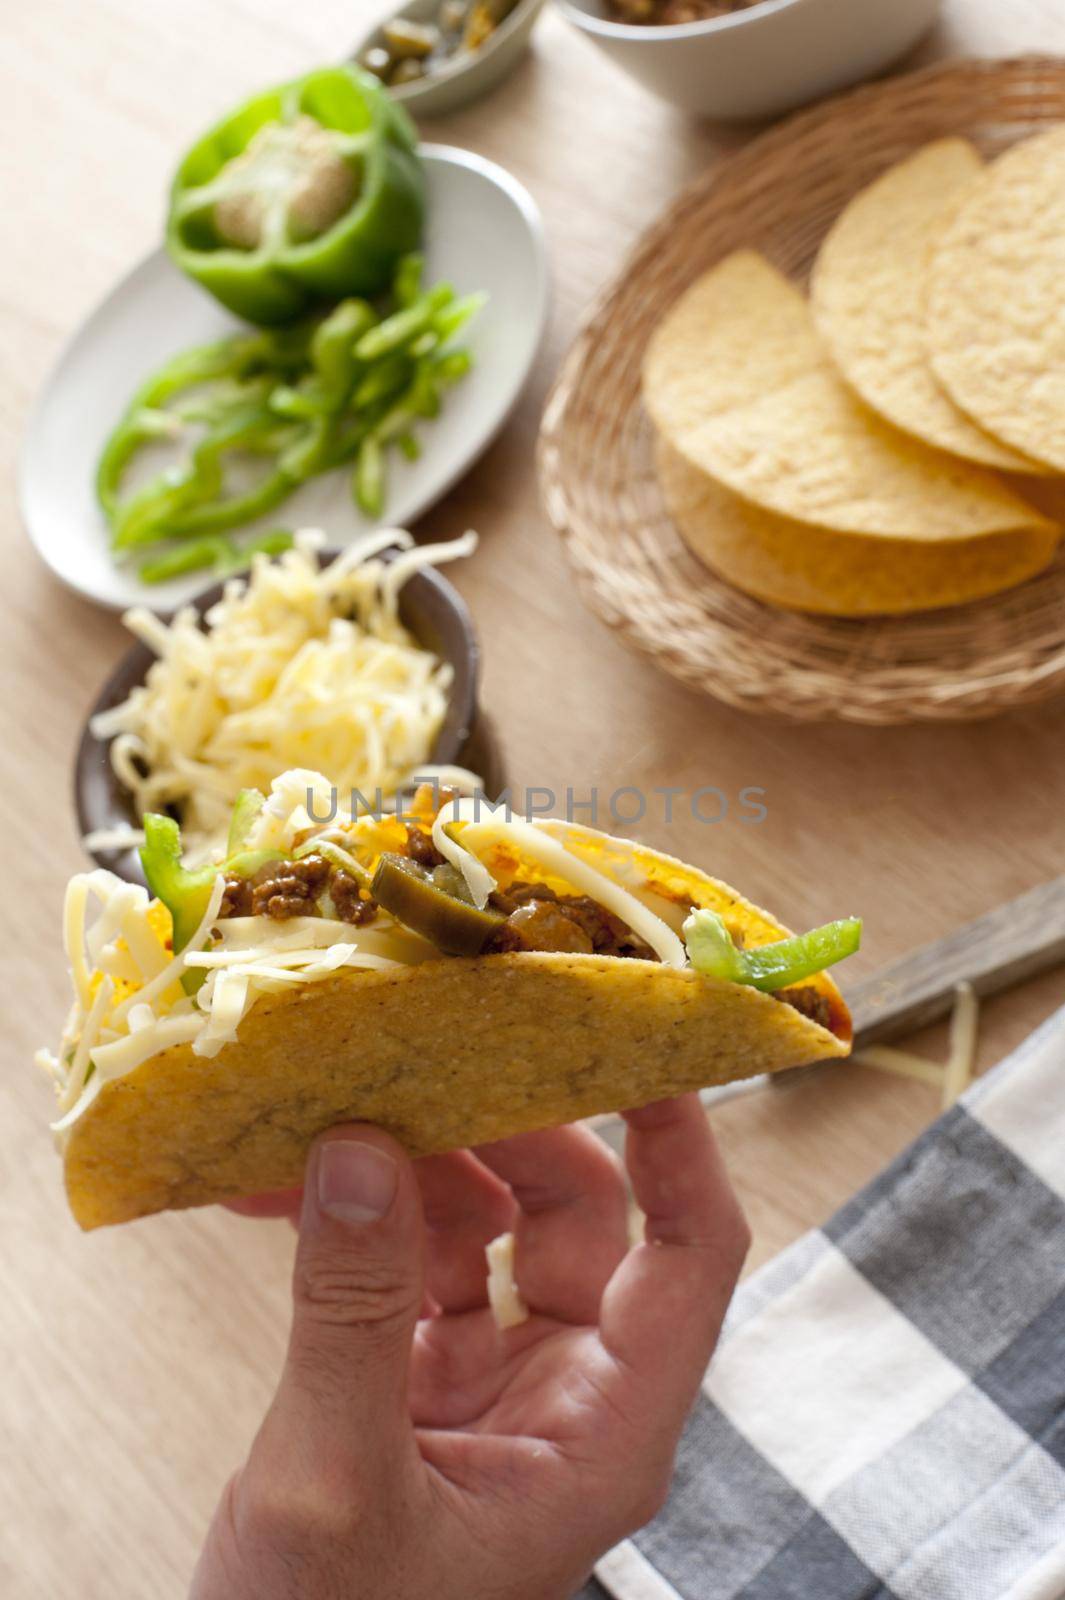 Selective focus of hand holding hard shelled taco beside bowl of shredded cheese and plate of cut green bell pepper